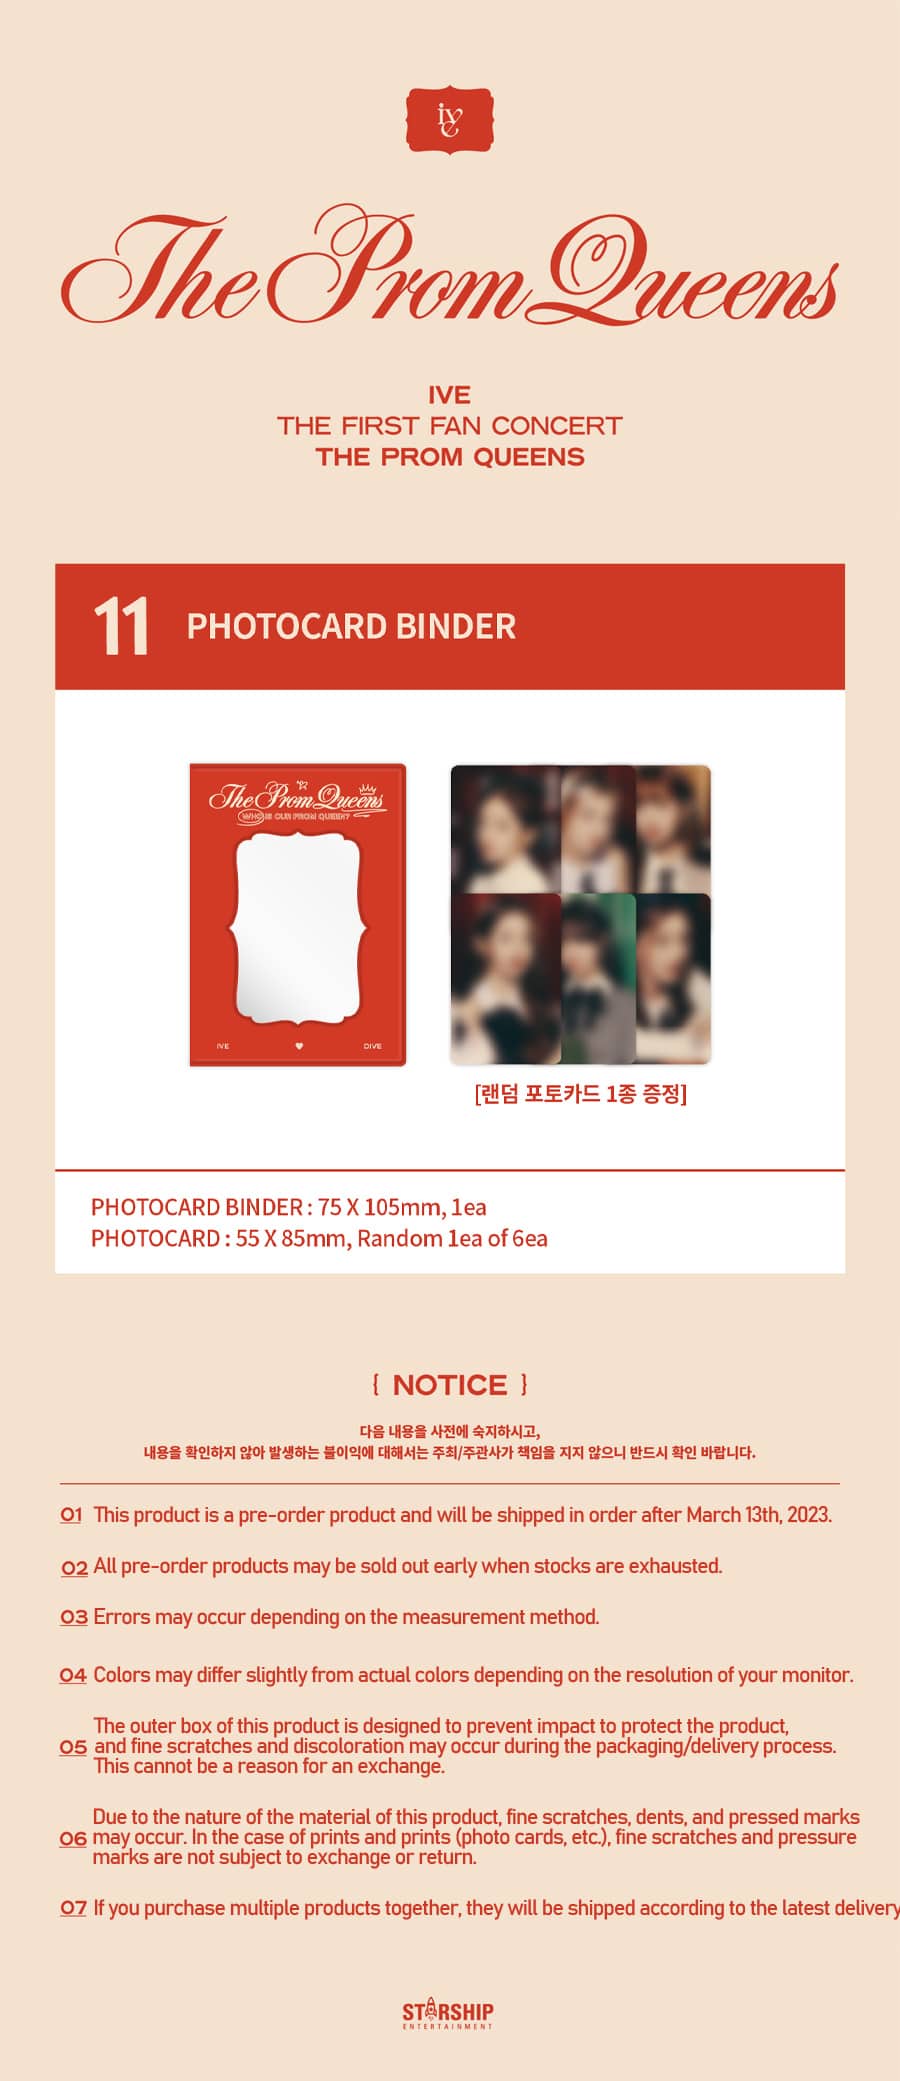 ive-the-prom-queens-photocard-binder-wholesale